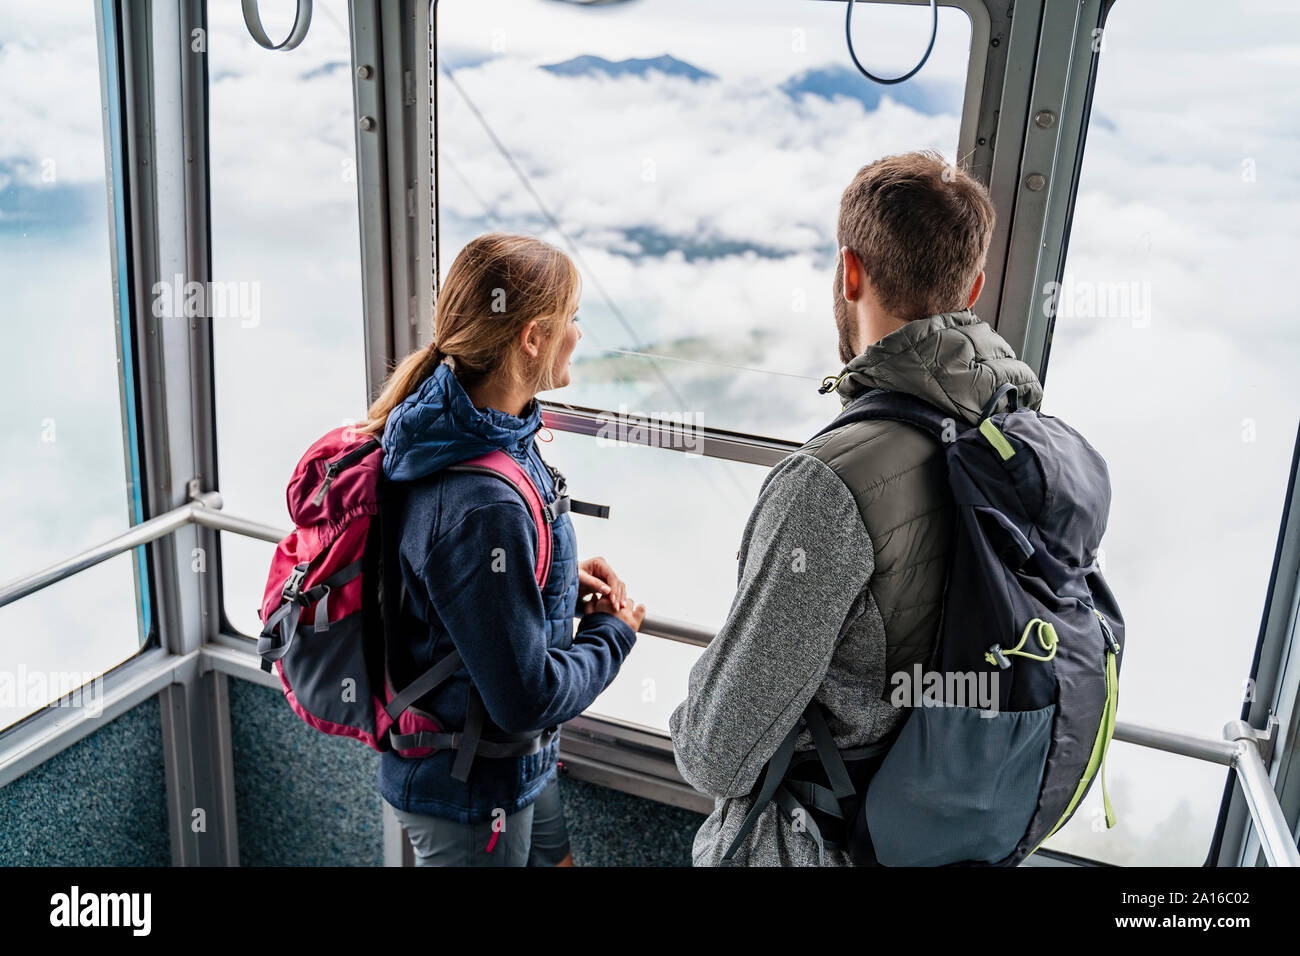 Young couple in a gondola cableway looking out of window, Herzogstand, Bavaria, Germany Stock Photo